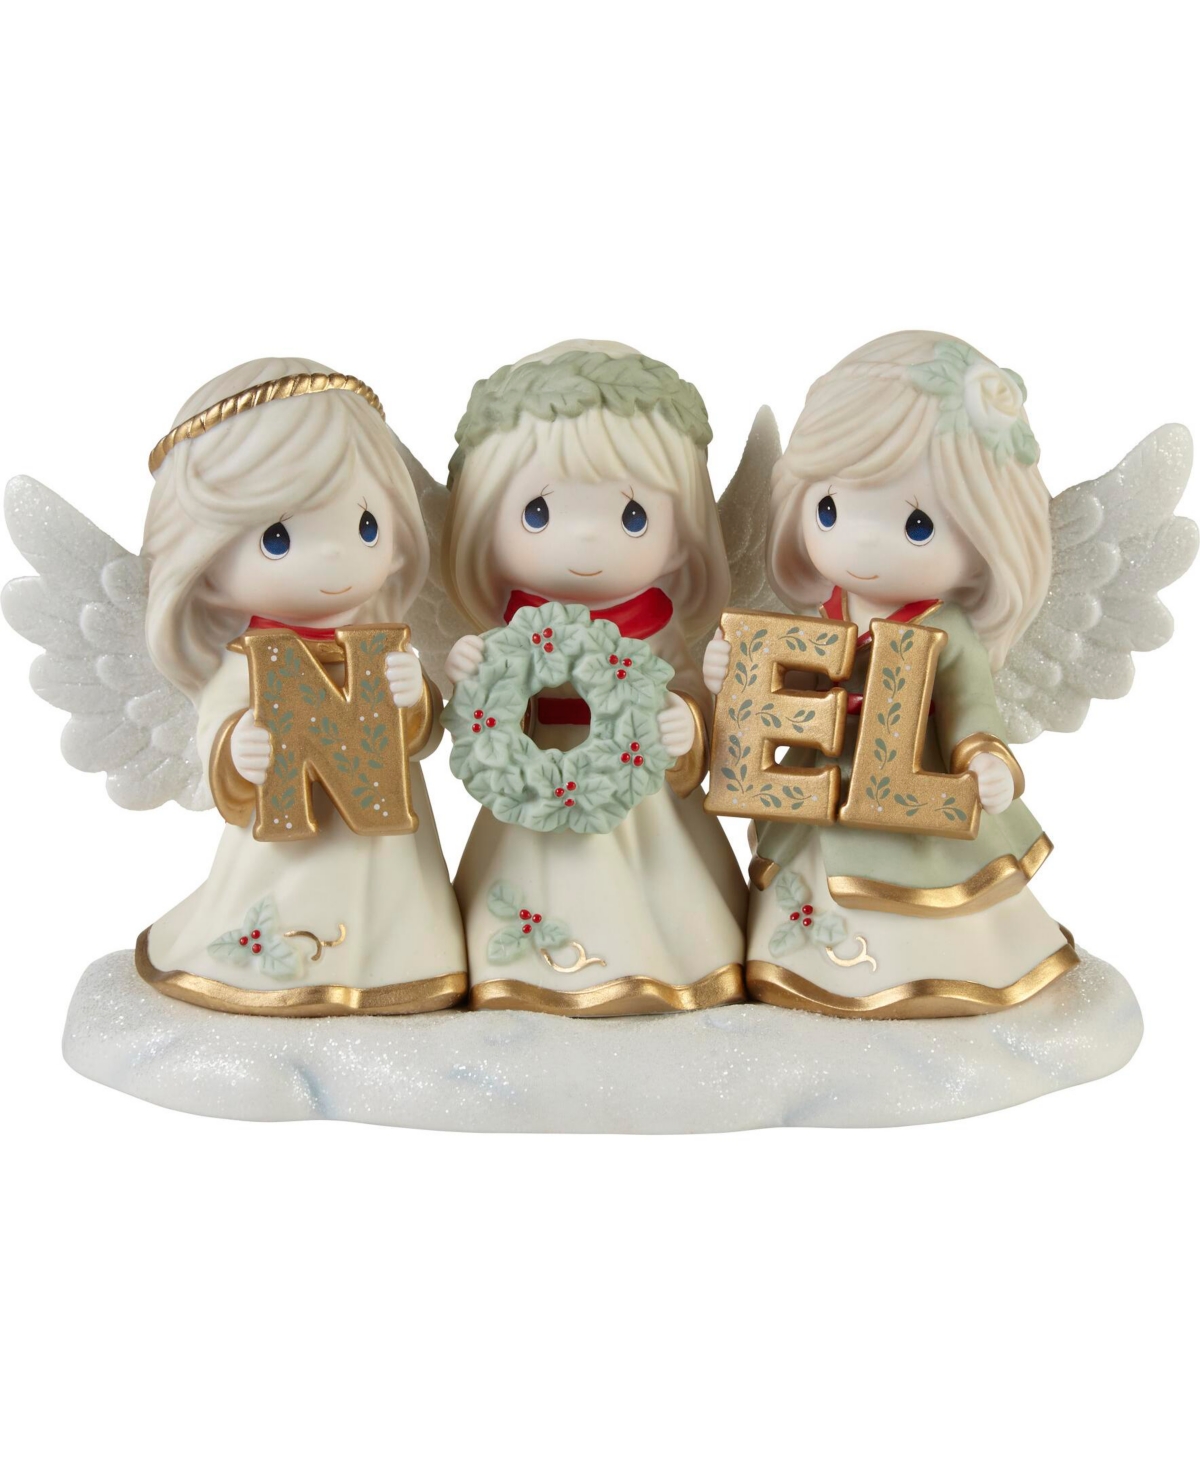 Precious Moments Joyeux Noel Limited Edition Bisque Porcelain Figurine In Multicolored